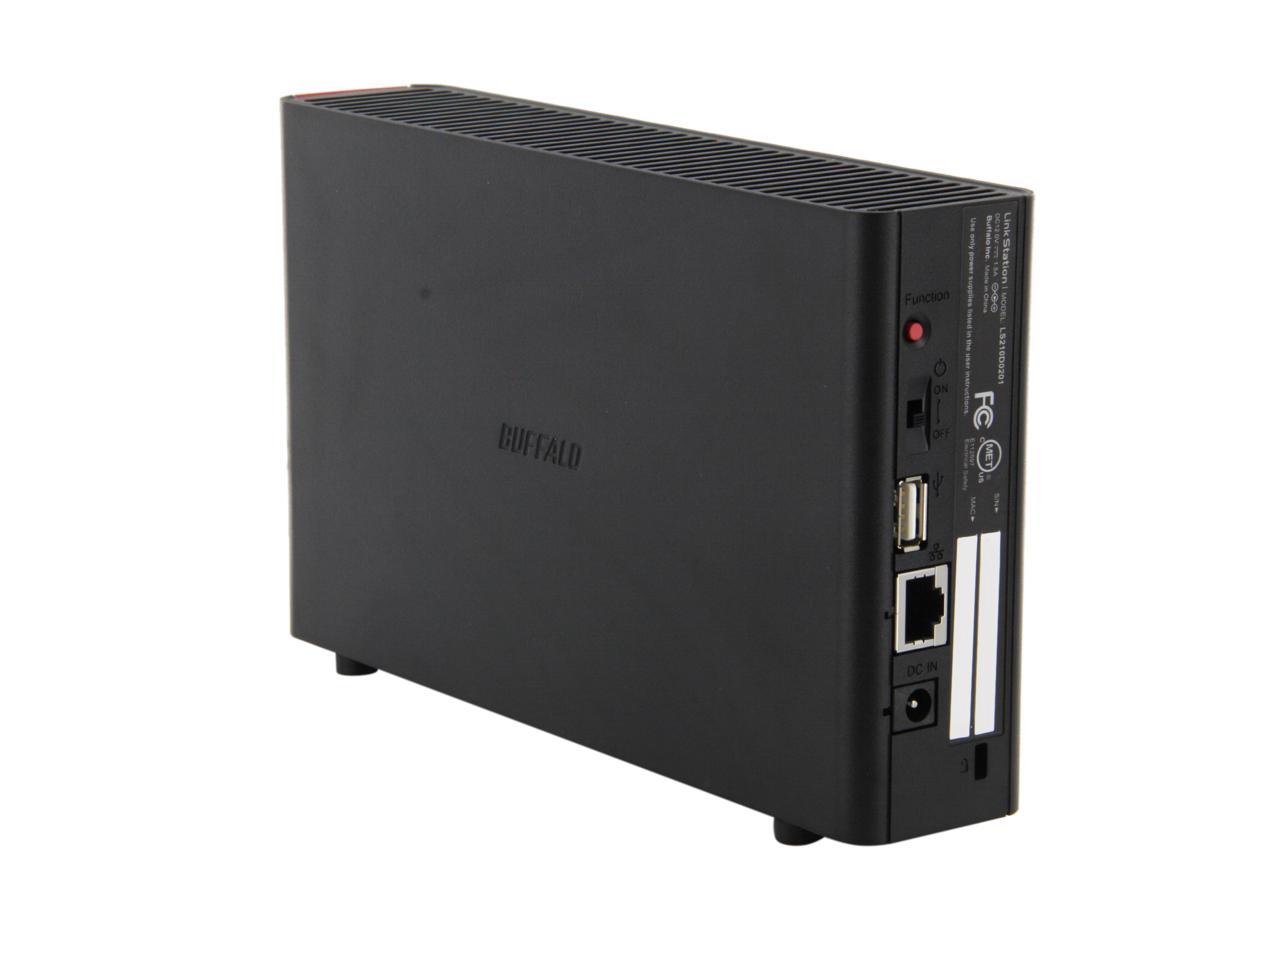 Arbejdsgiver volleyball blast LinkStation 210 2TB Personal Cloud Storage with Hard Drives Included  (LS210D0201) - Newegg.com